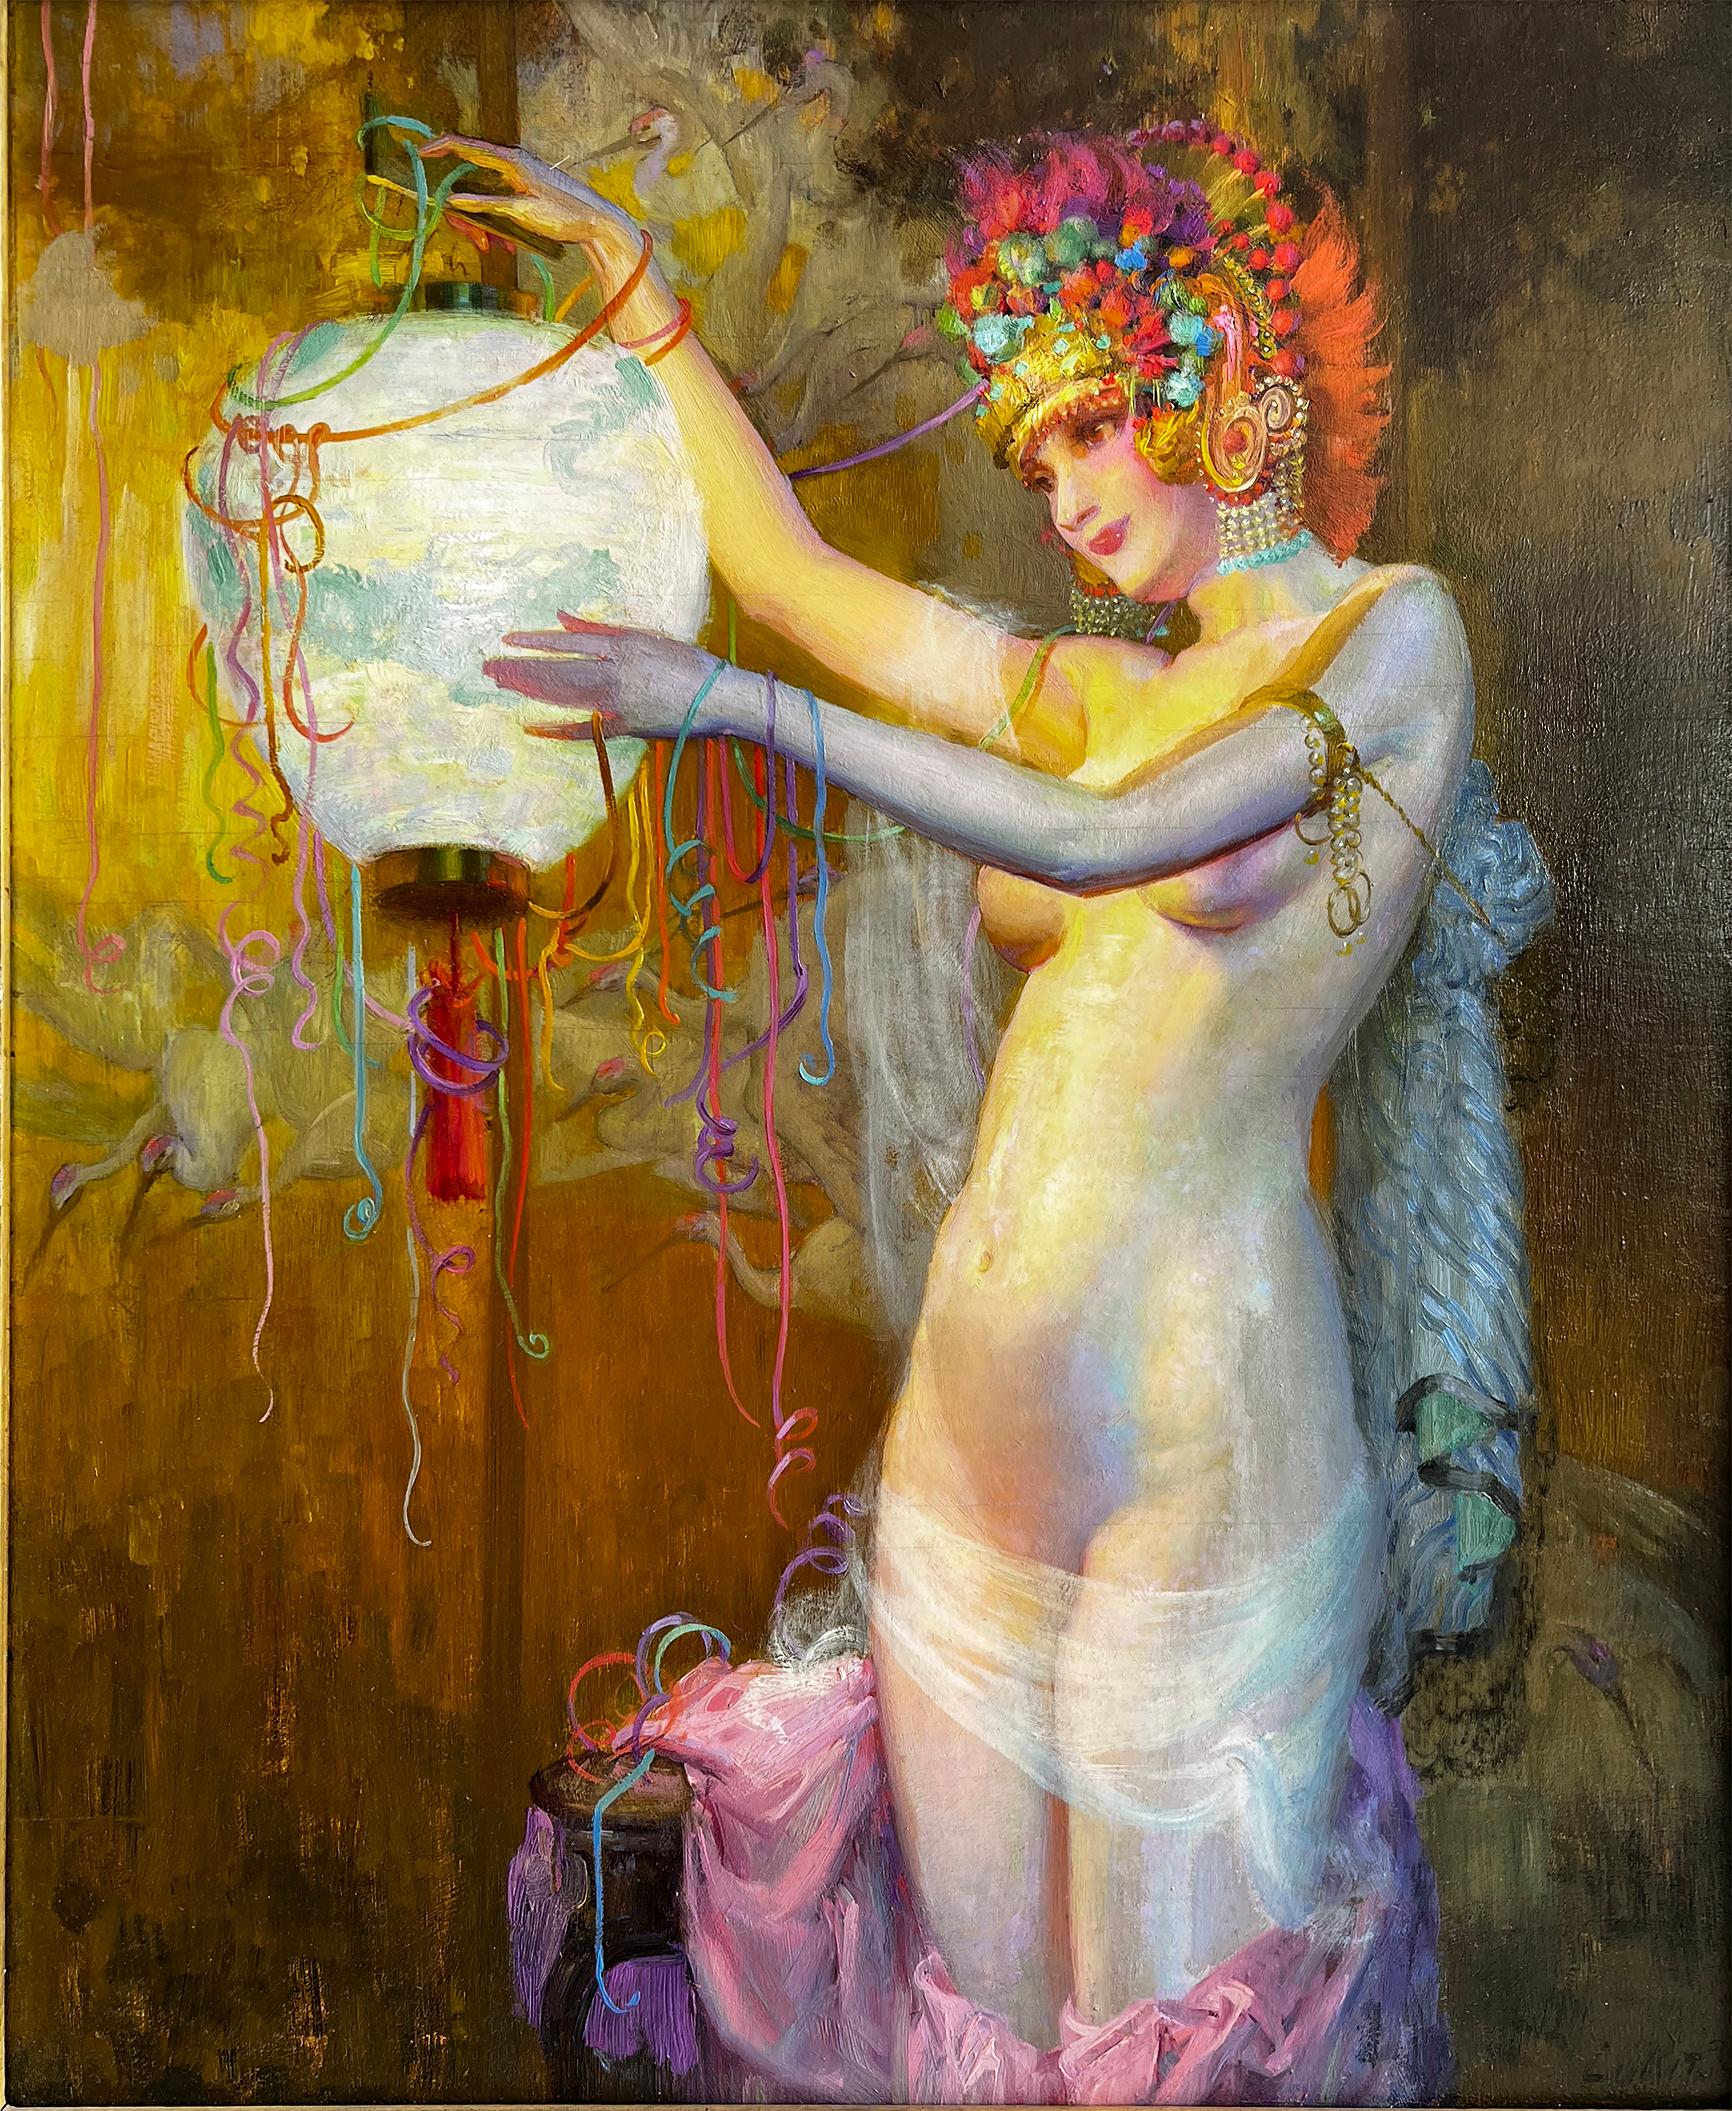 Theodore Lukits Nude Painting - Nude Dancer with Ornate Floral  Headdress and Japanese Lantern  - Carnival 